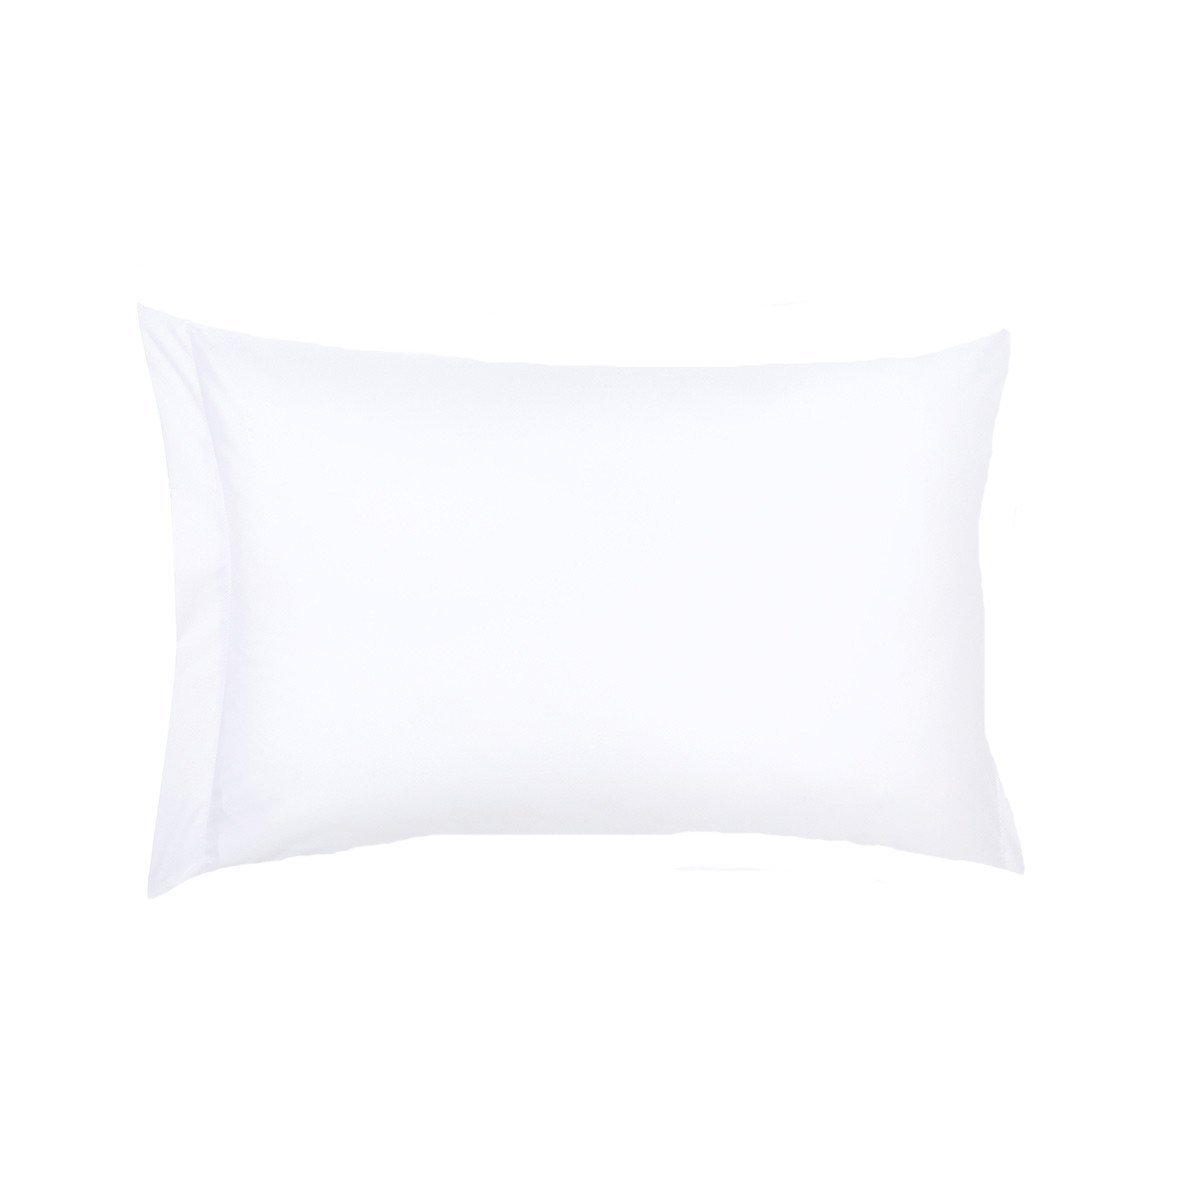 Roma Blanc Bedding by Yves Delorme | Fig Linens - Luxury cotton, white bed linens, pillowcase